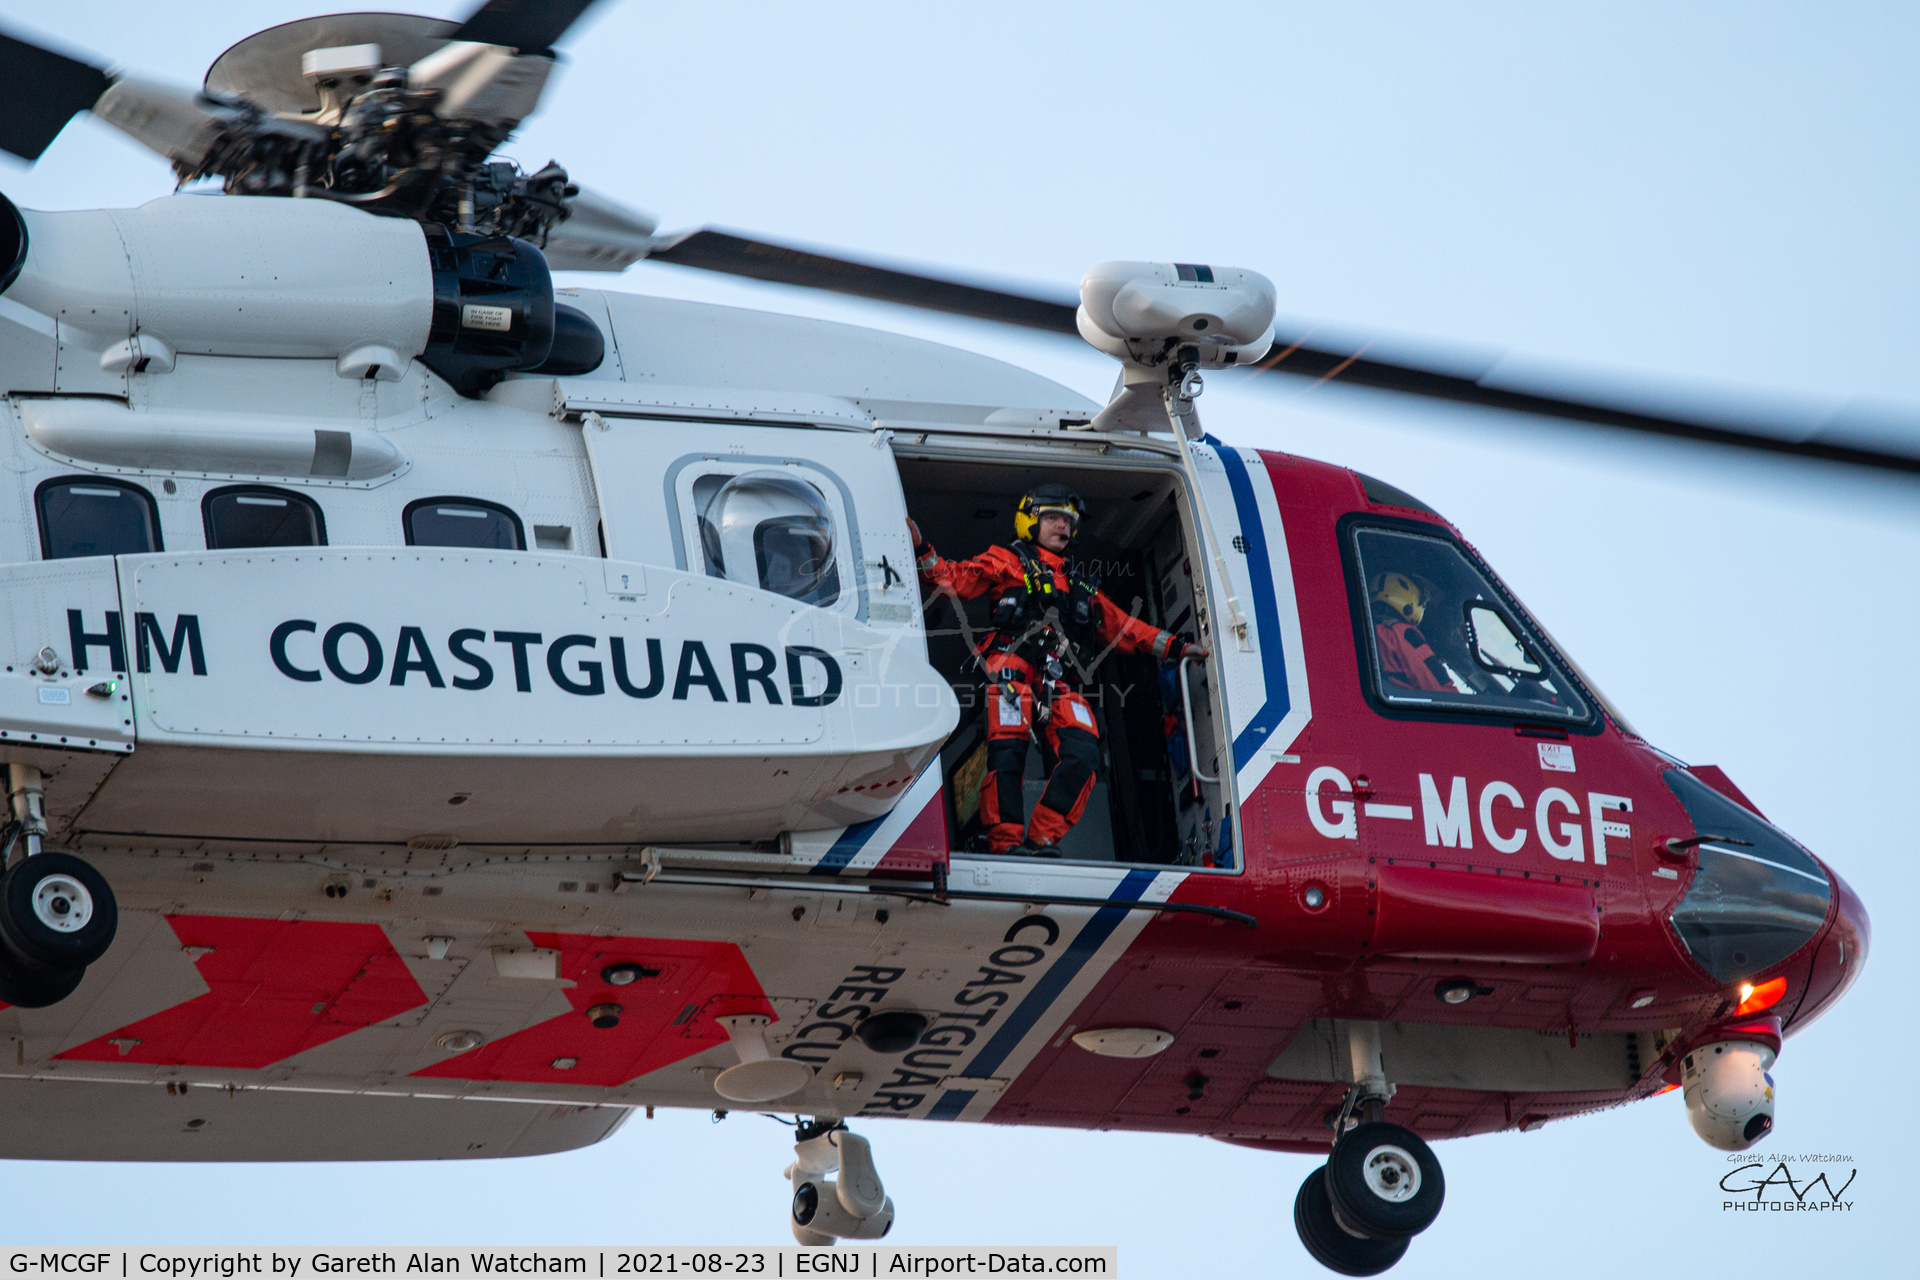 G-MCGF, 2013 Sikorsky S-92A C/N 920222, Coastguard Rescue 912 - Operations in the Humber (GMCGF temp replacement)